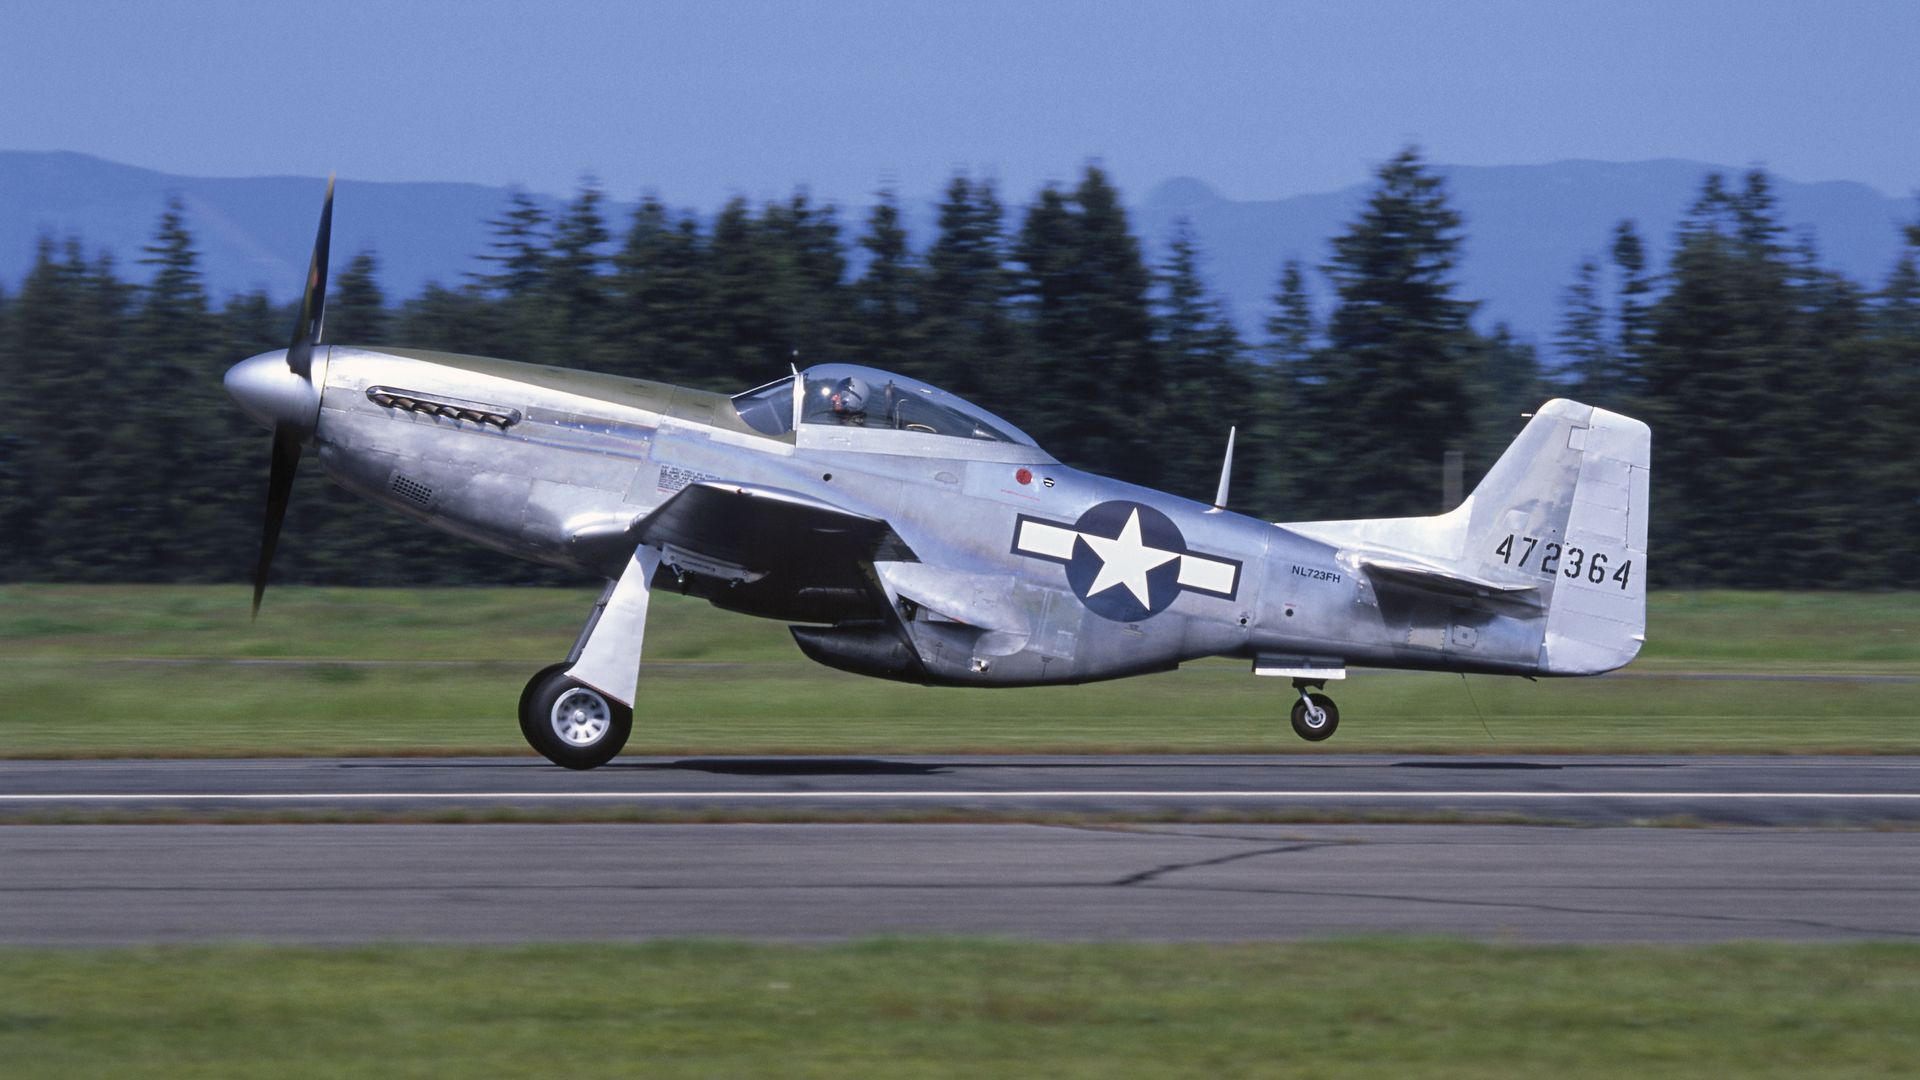 This vintage P-51 Mustang, one of the most feared fighter jets in World War II,  is part of the late-Paul Allen's collection that was purchased by Walmart heir Steuart Walton's .